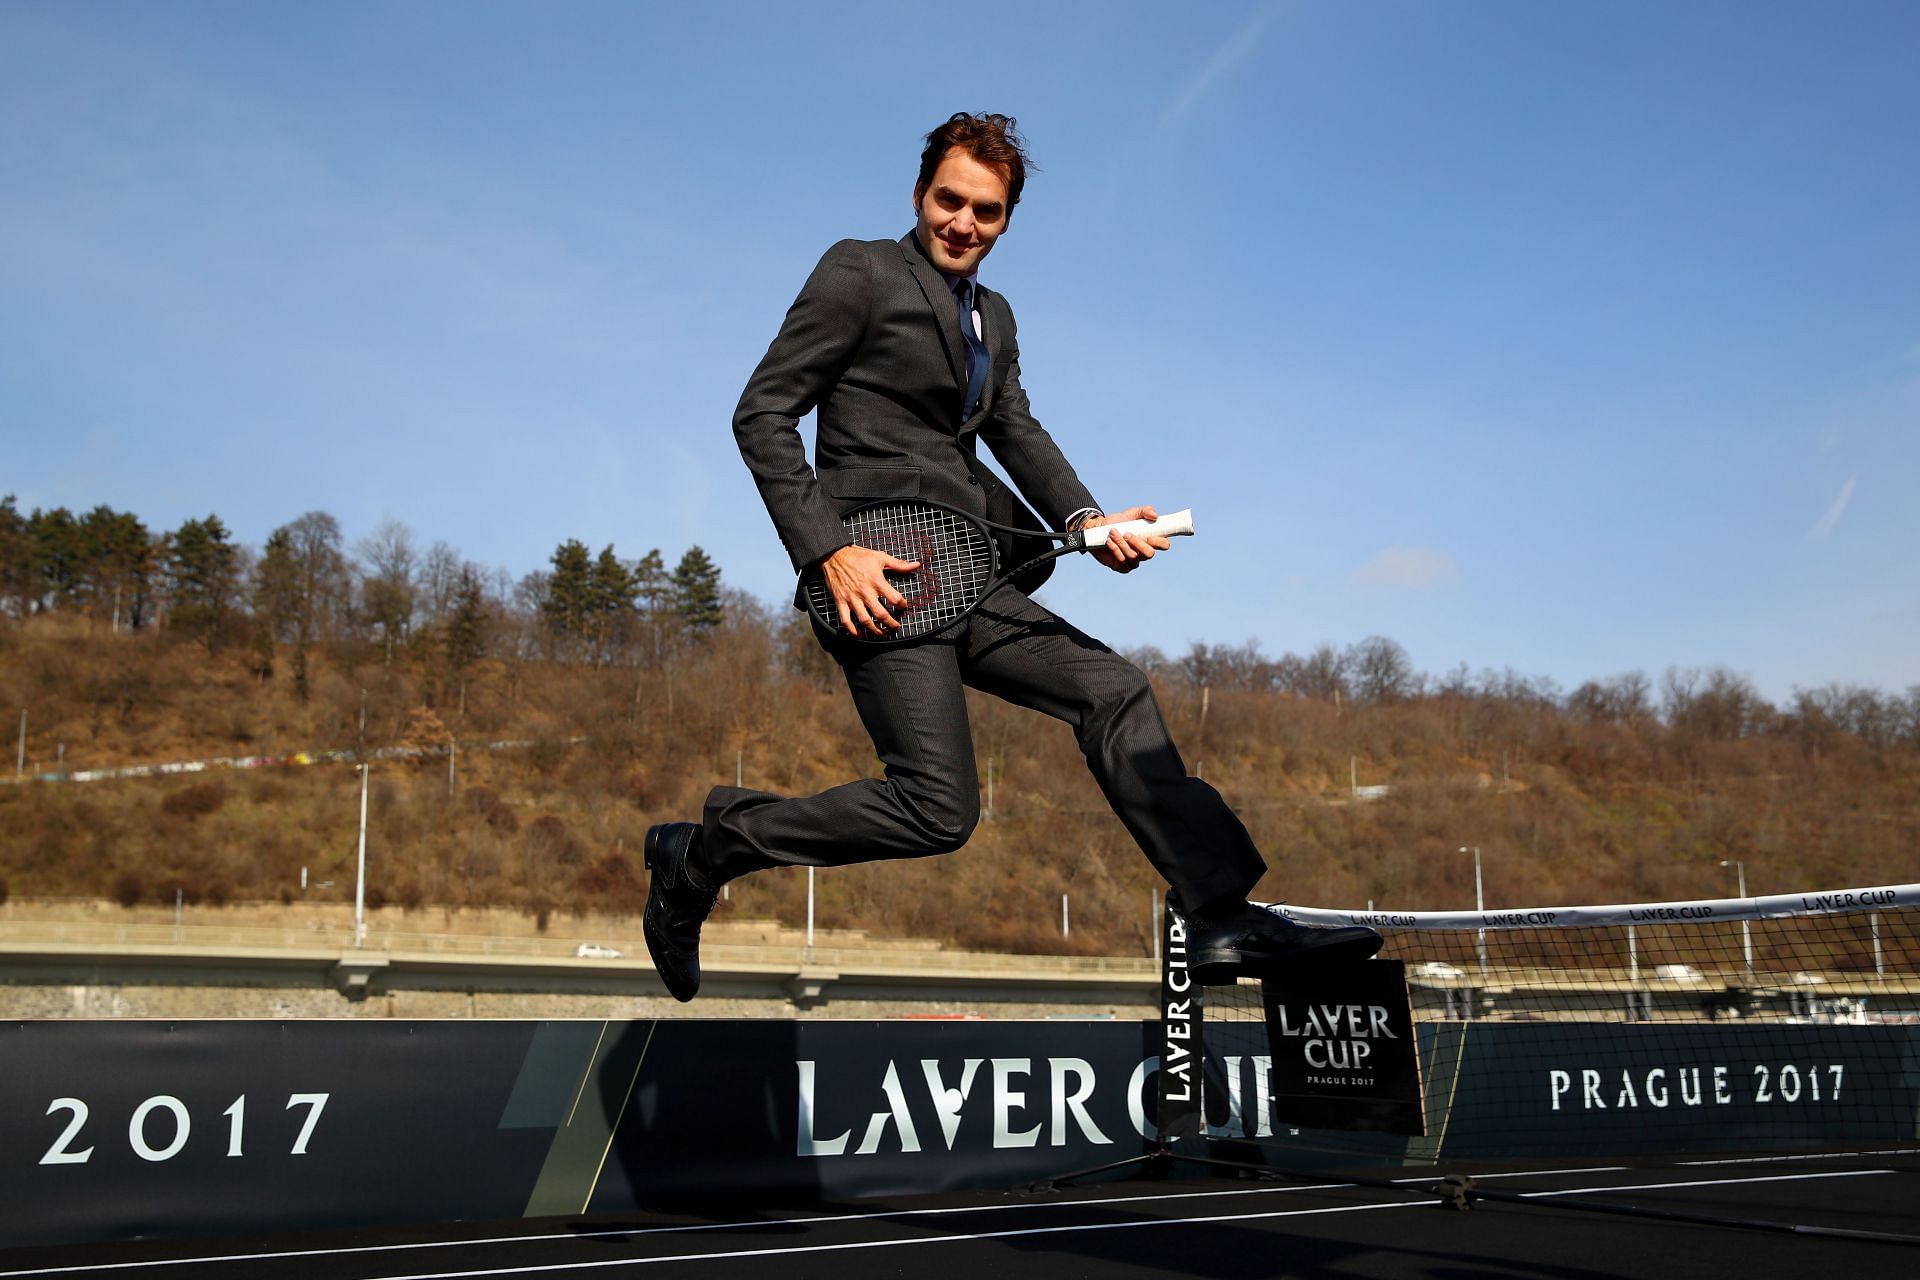 Roger Federer will be back in action at the Laver Cup